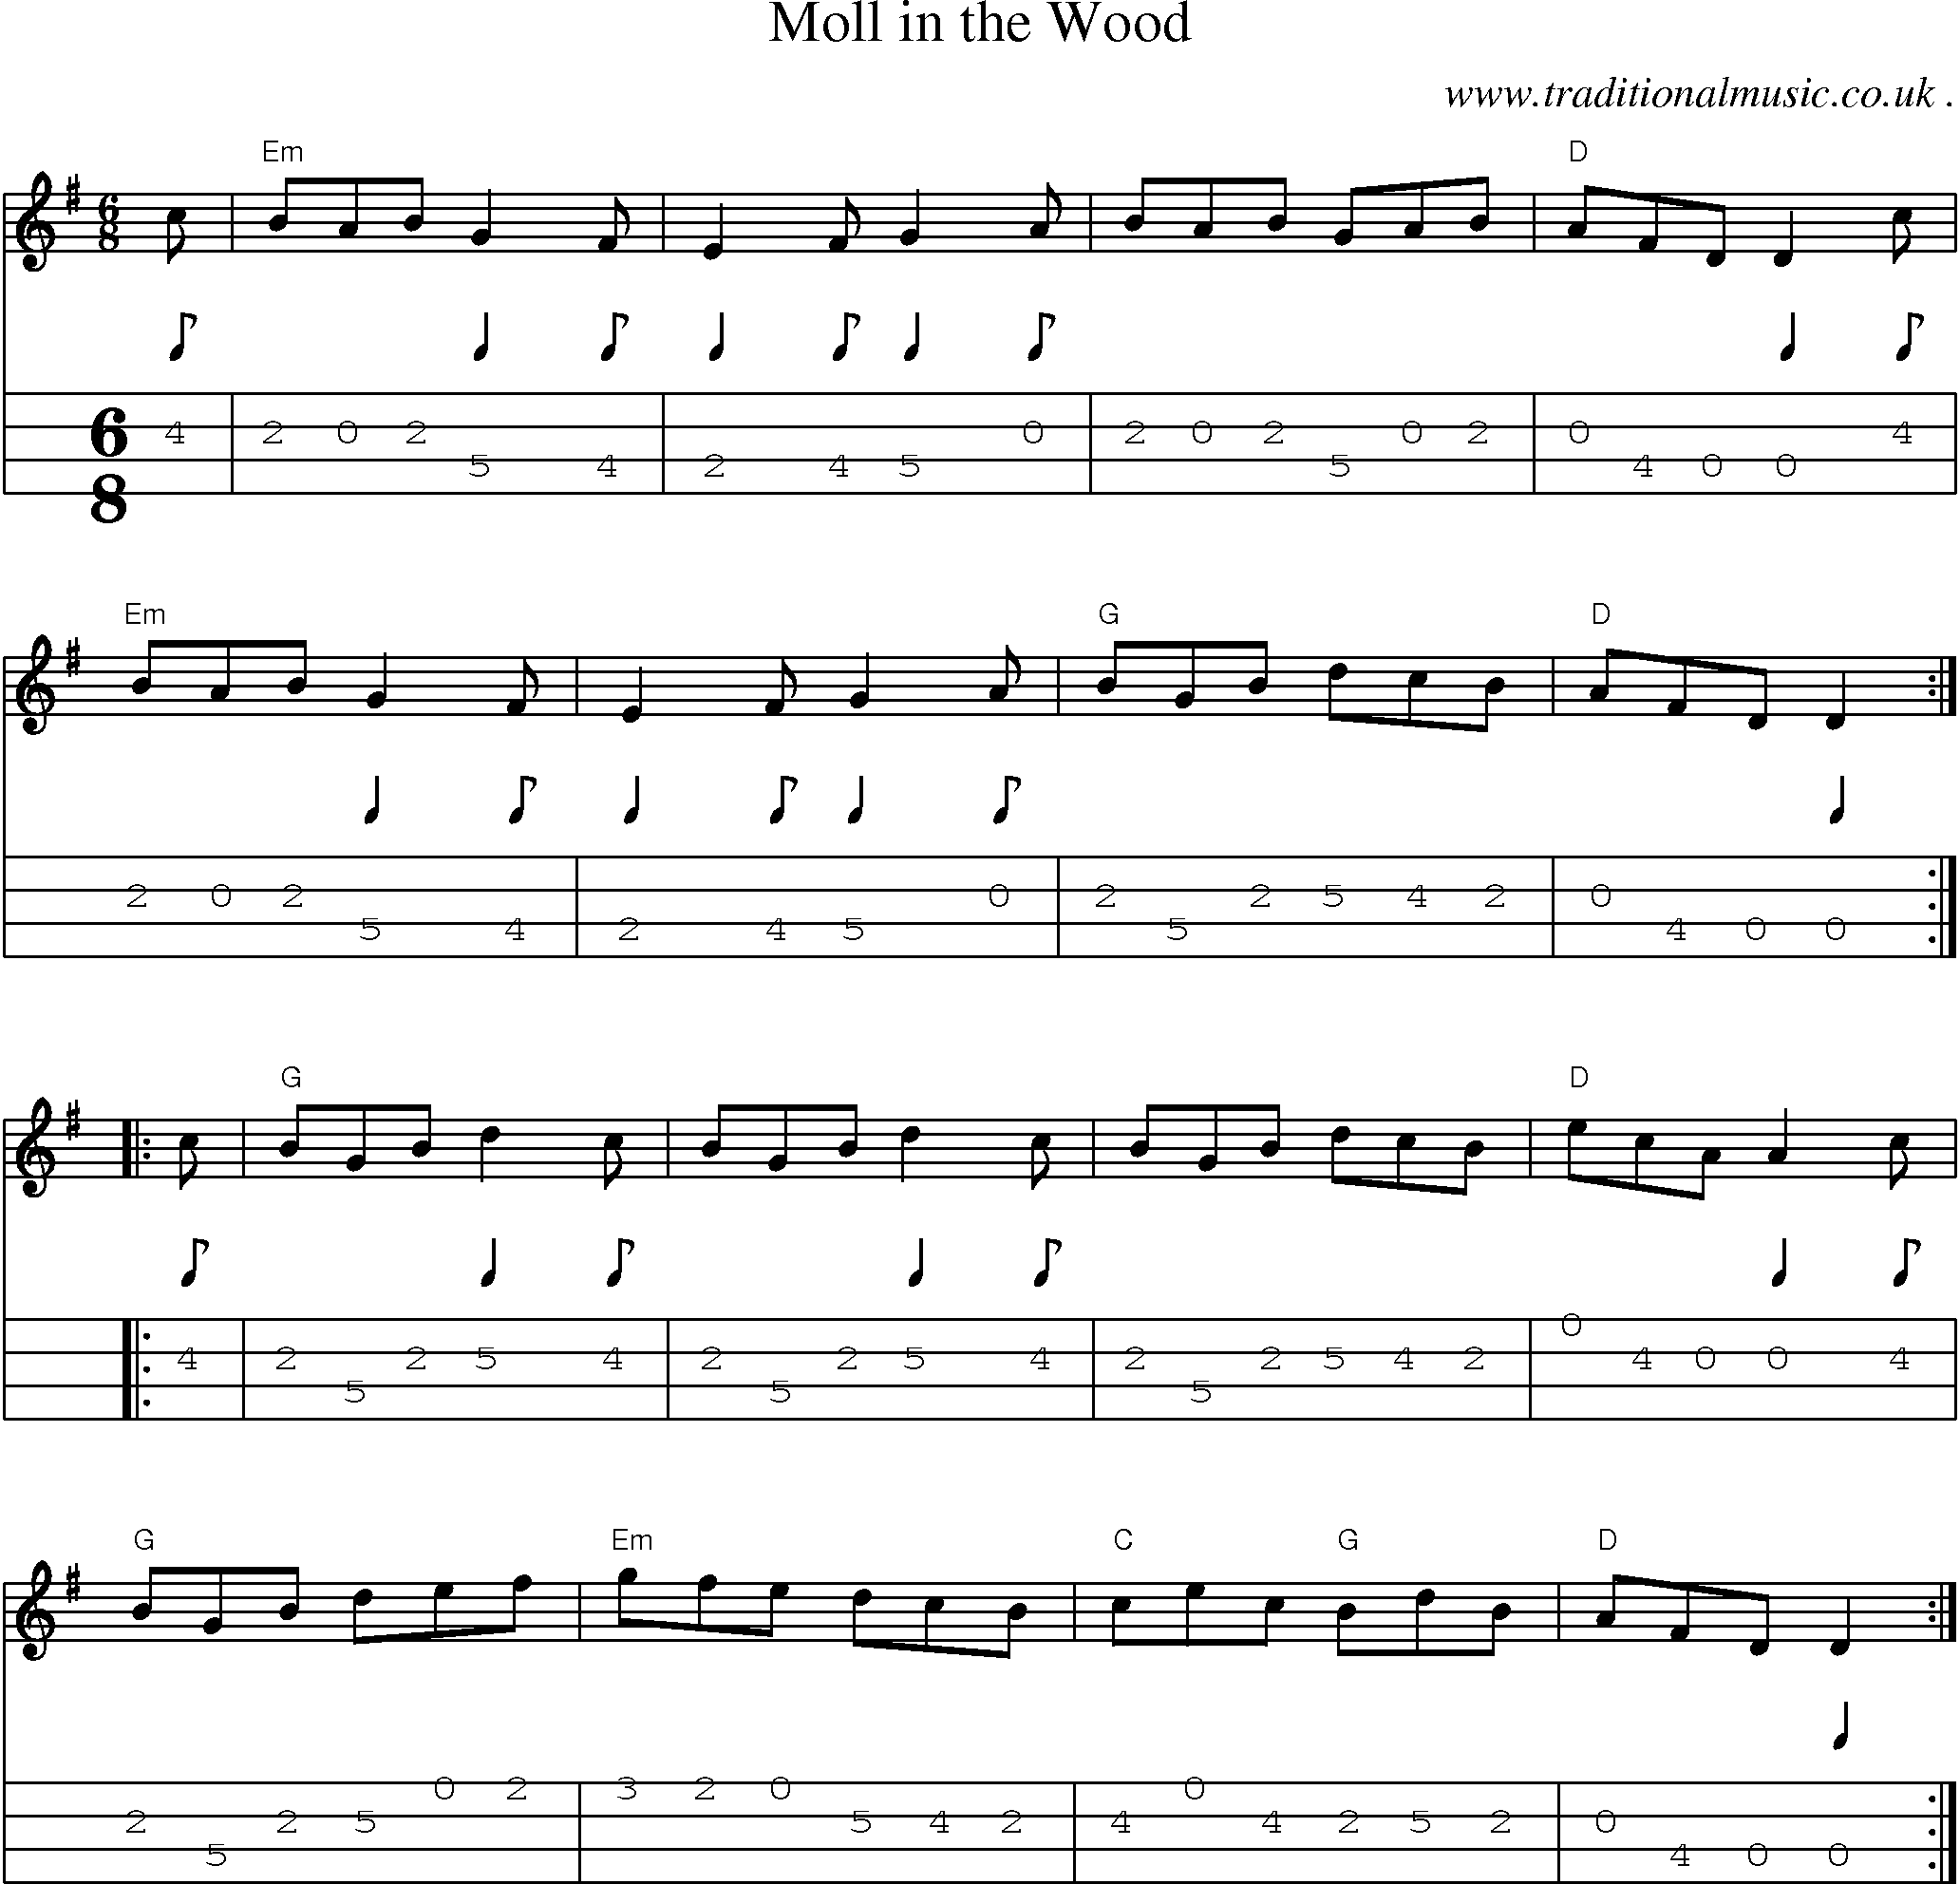 Music Score and Guitar Tabs for Moll in the Wood